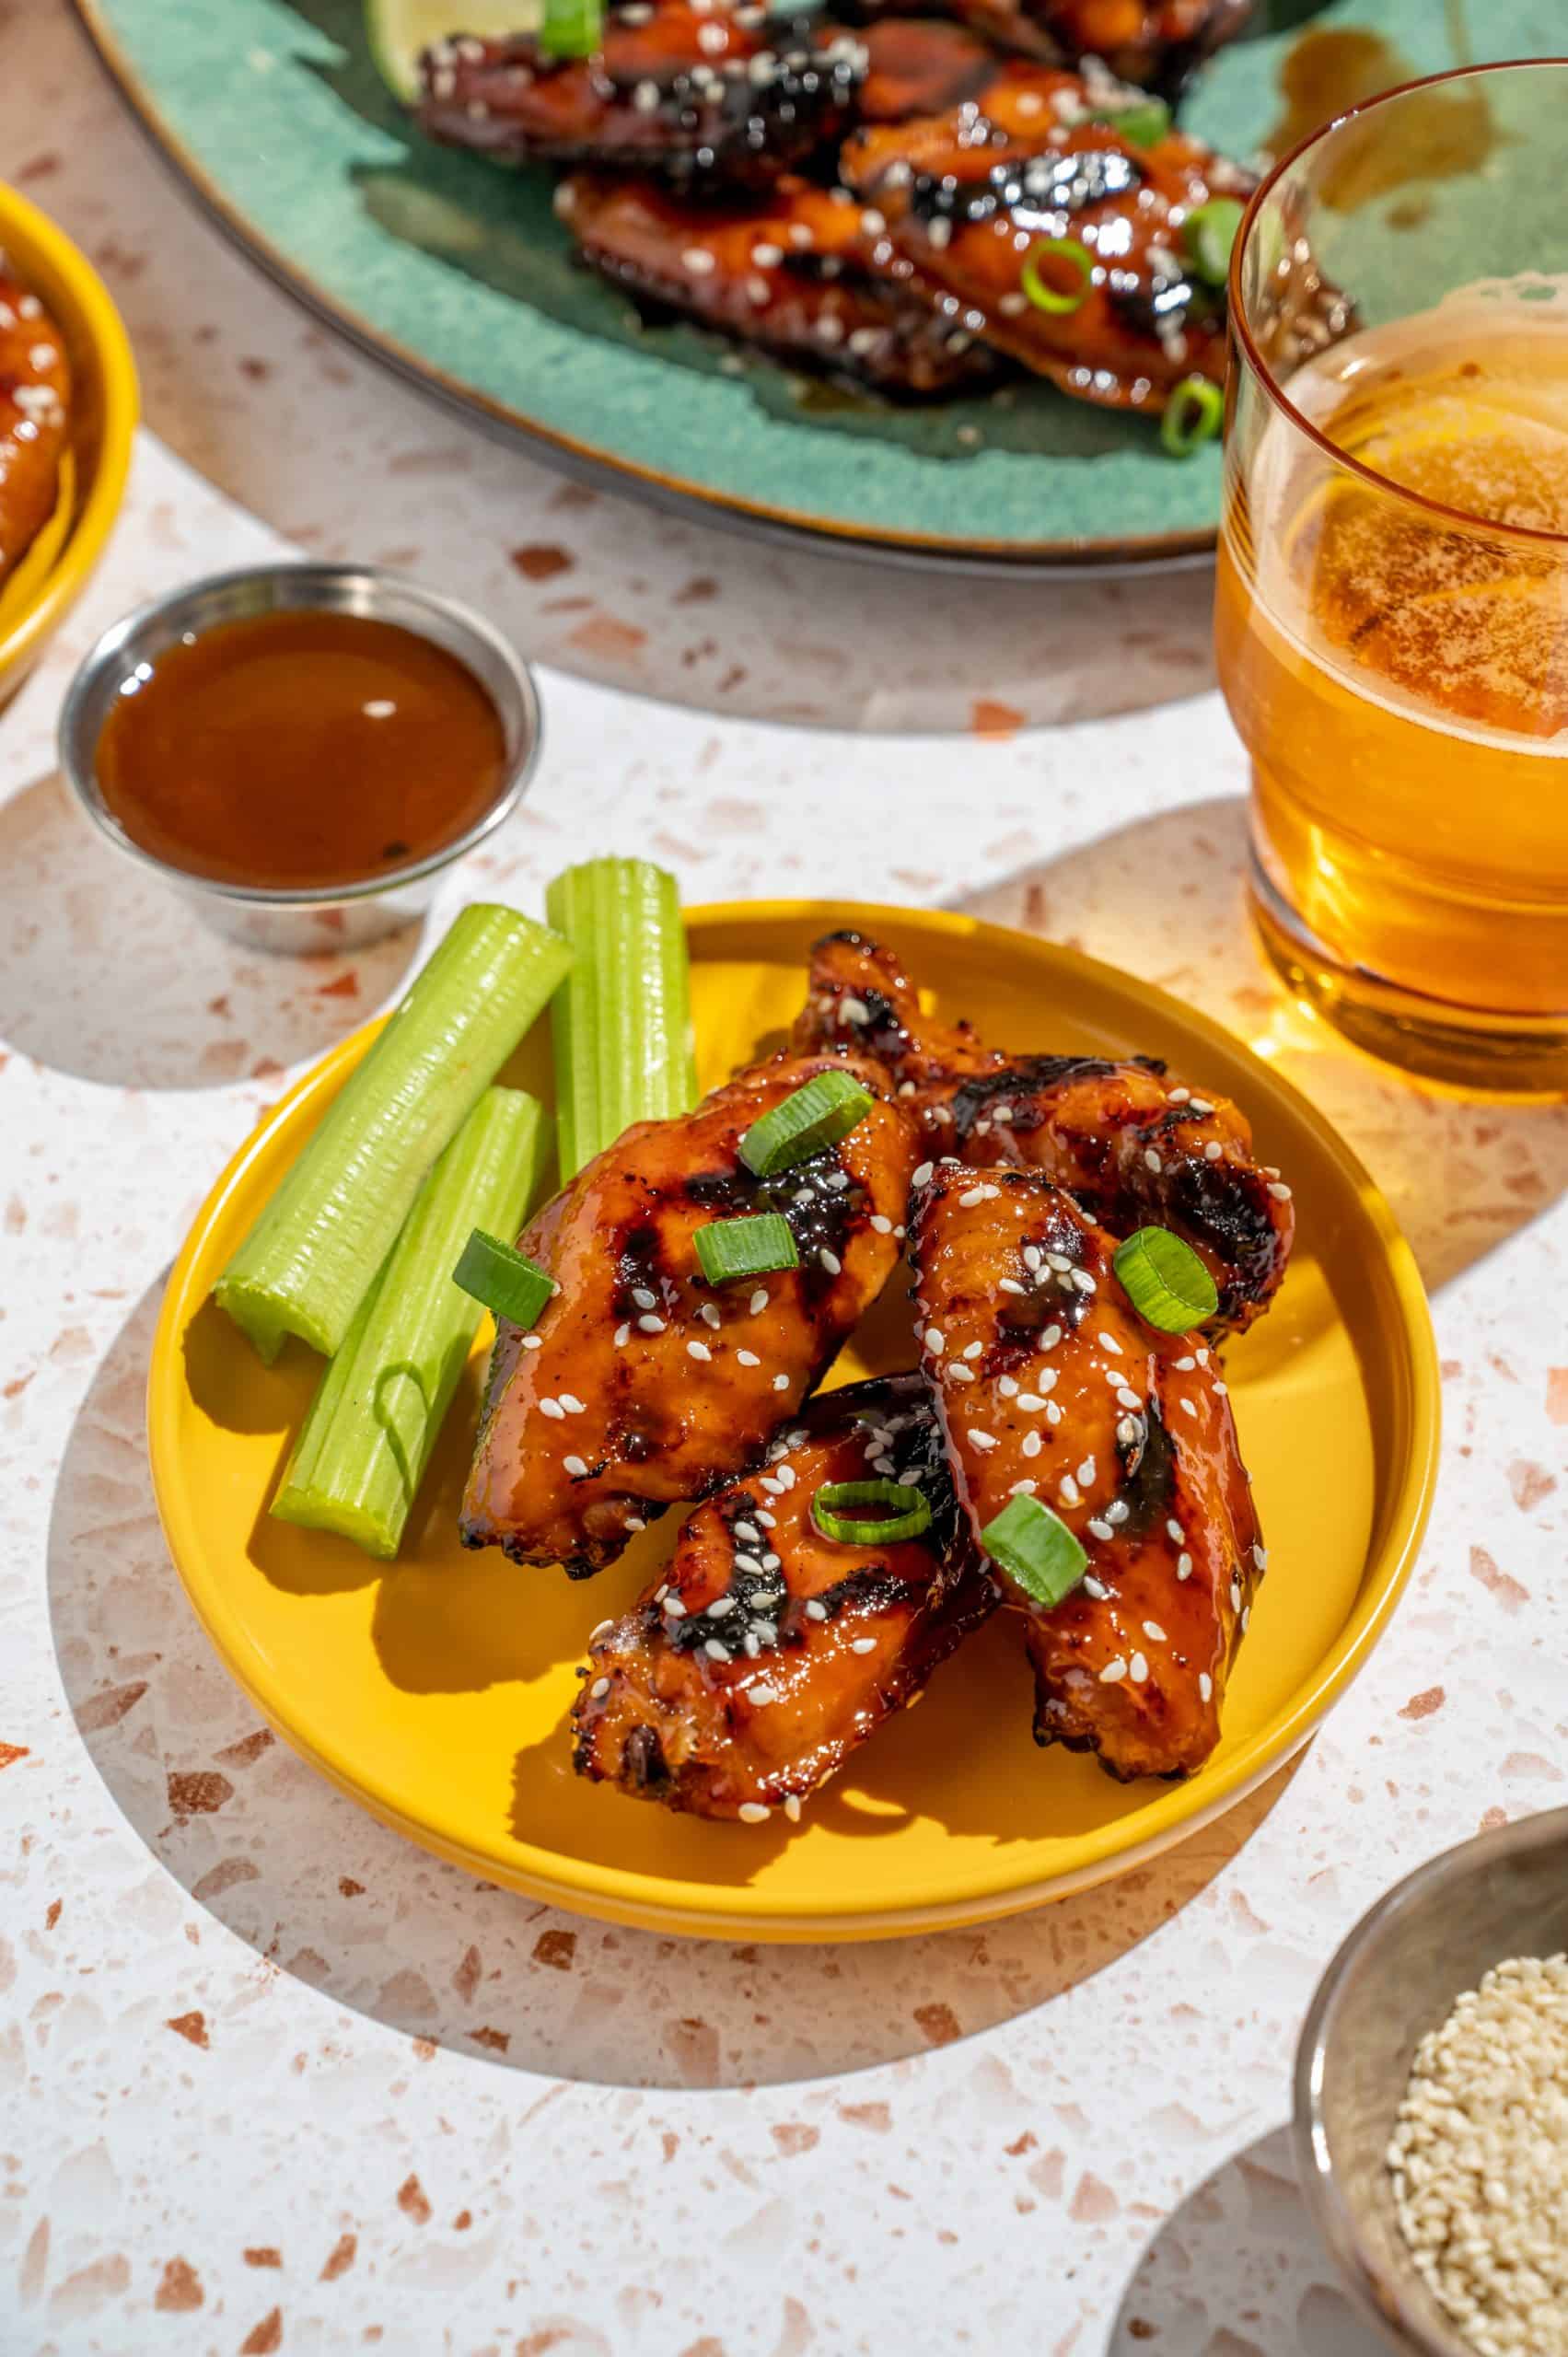 Small plate with Asian grilled chicken wings and celery, a glass of beer and extra sauce on the side, with a platter in the background